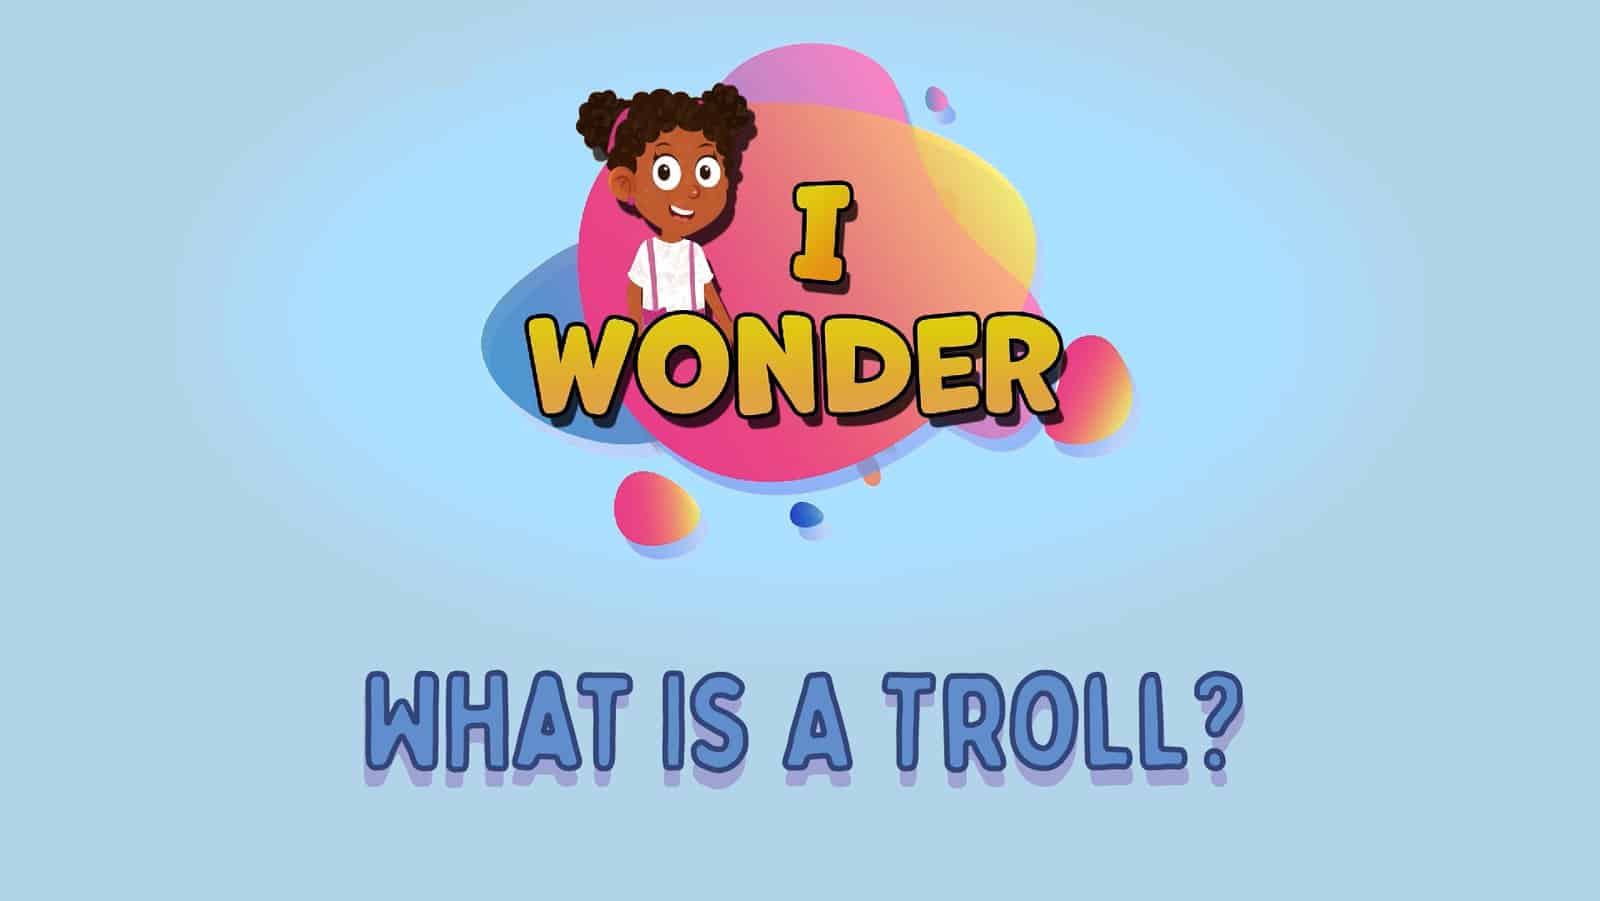 What Is A Troll?